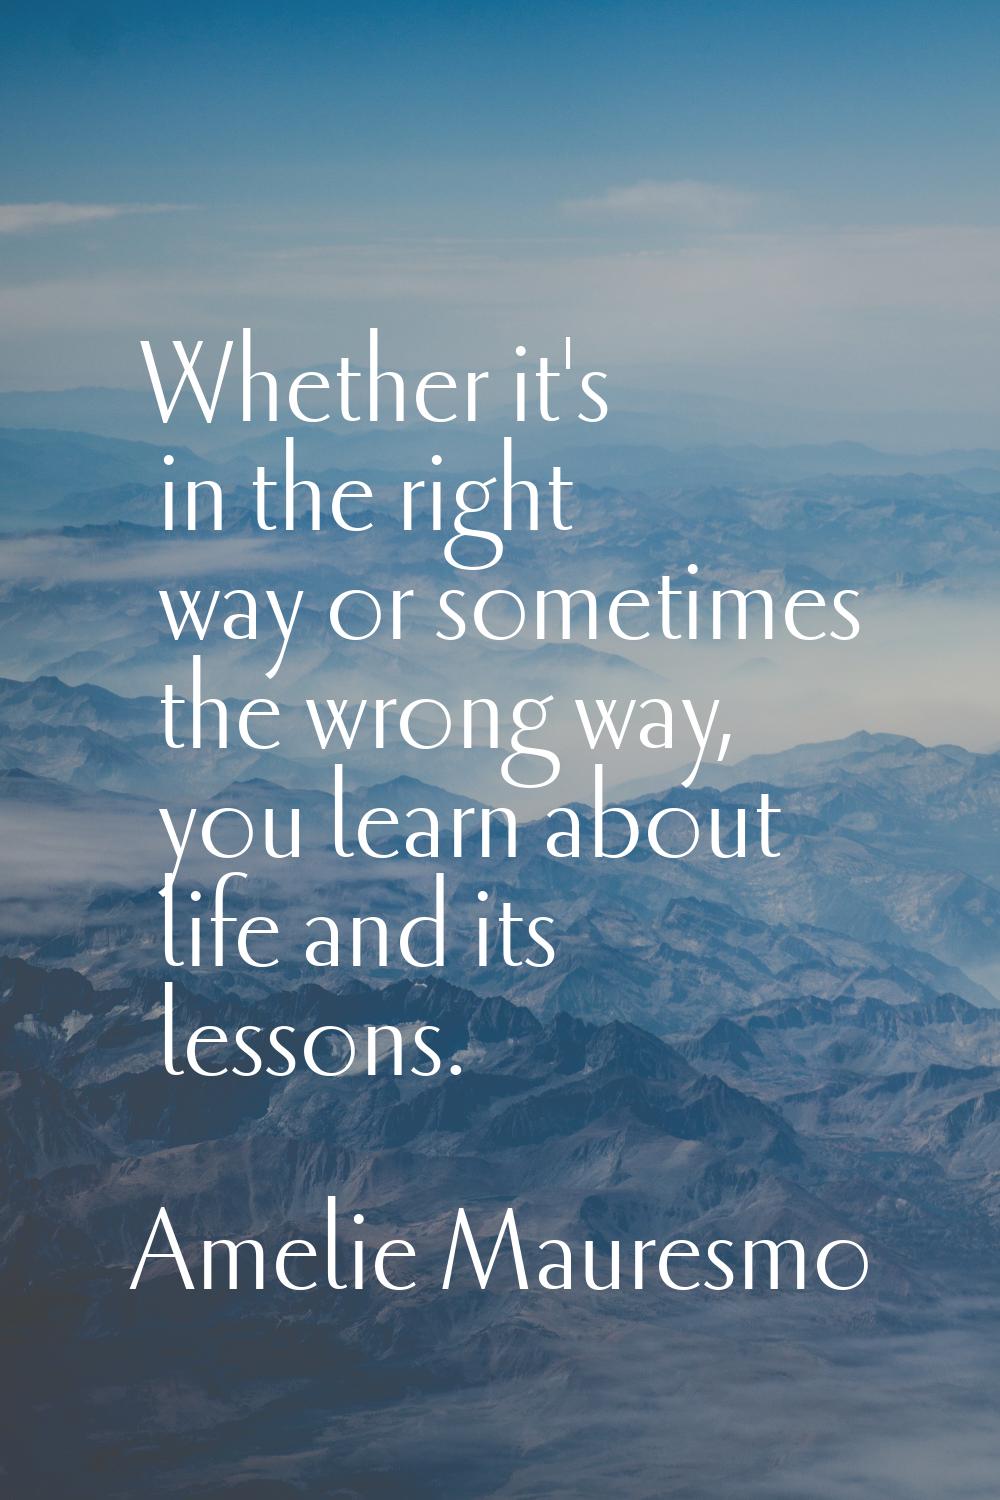 Whether it's in the right way or sometimes the wrong way, you learn about life and its lessons.